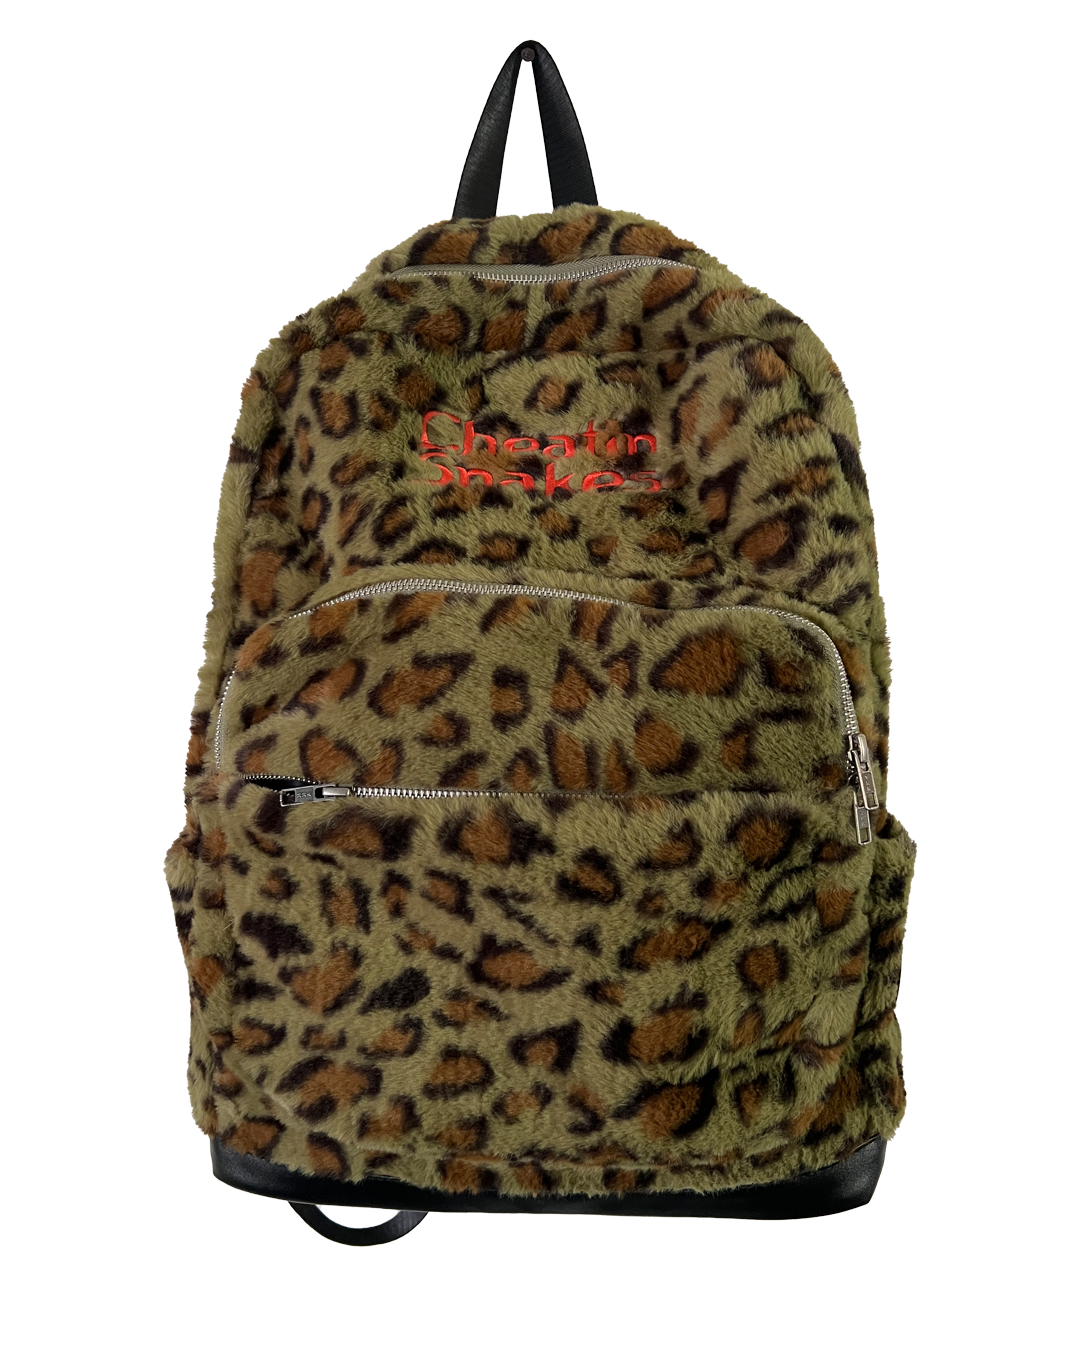 FREAKOUT BACKPACK